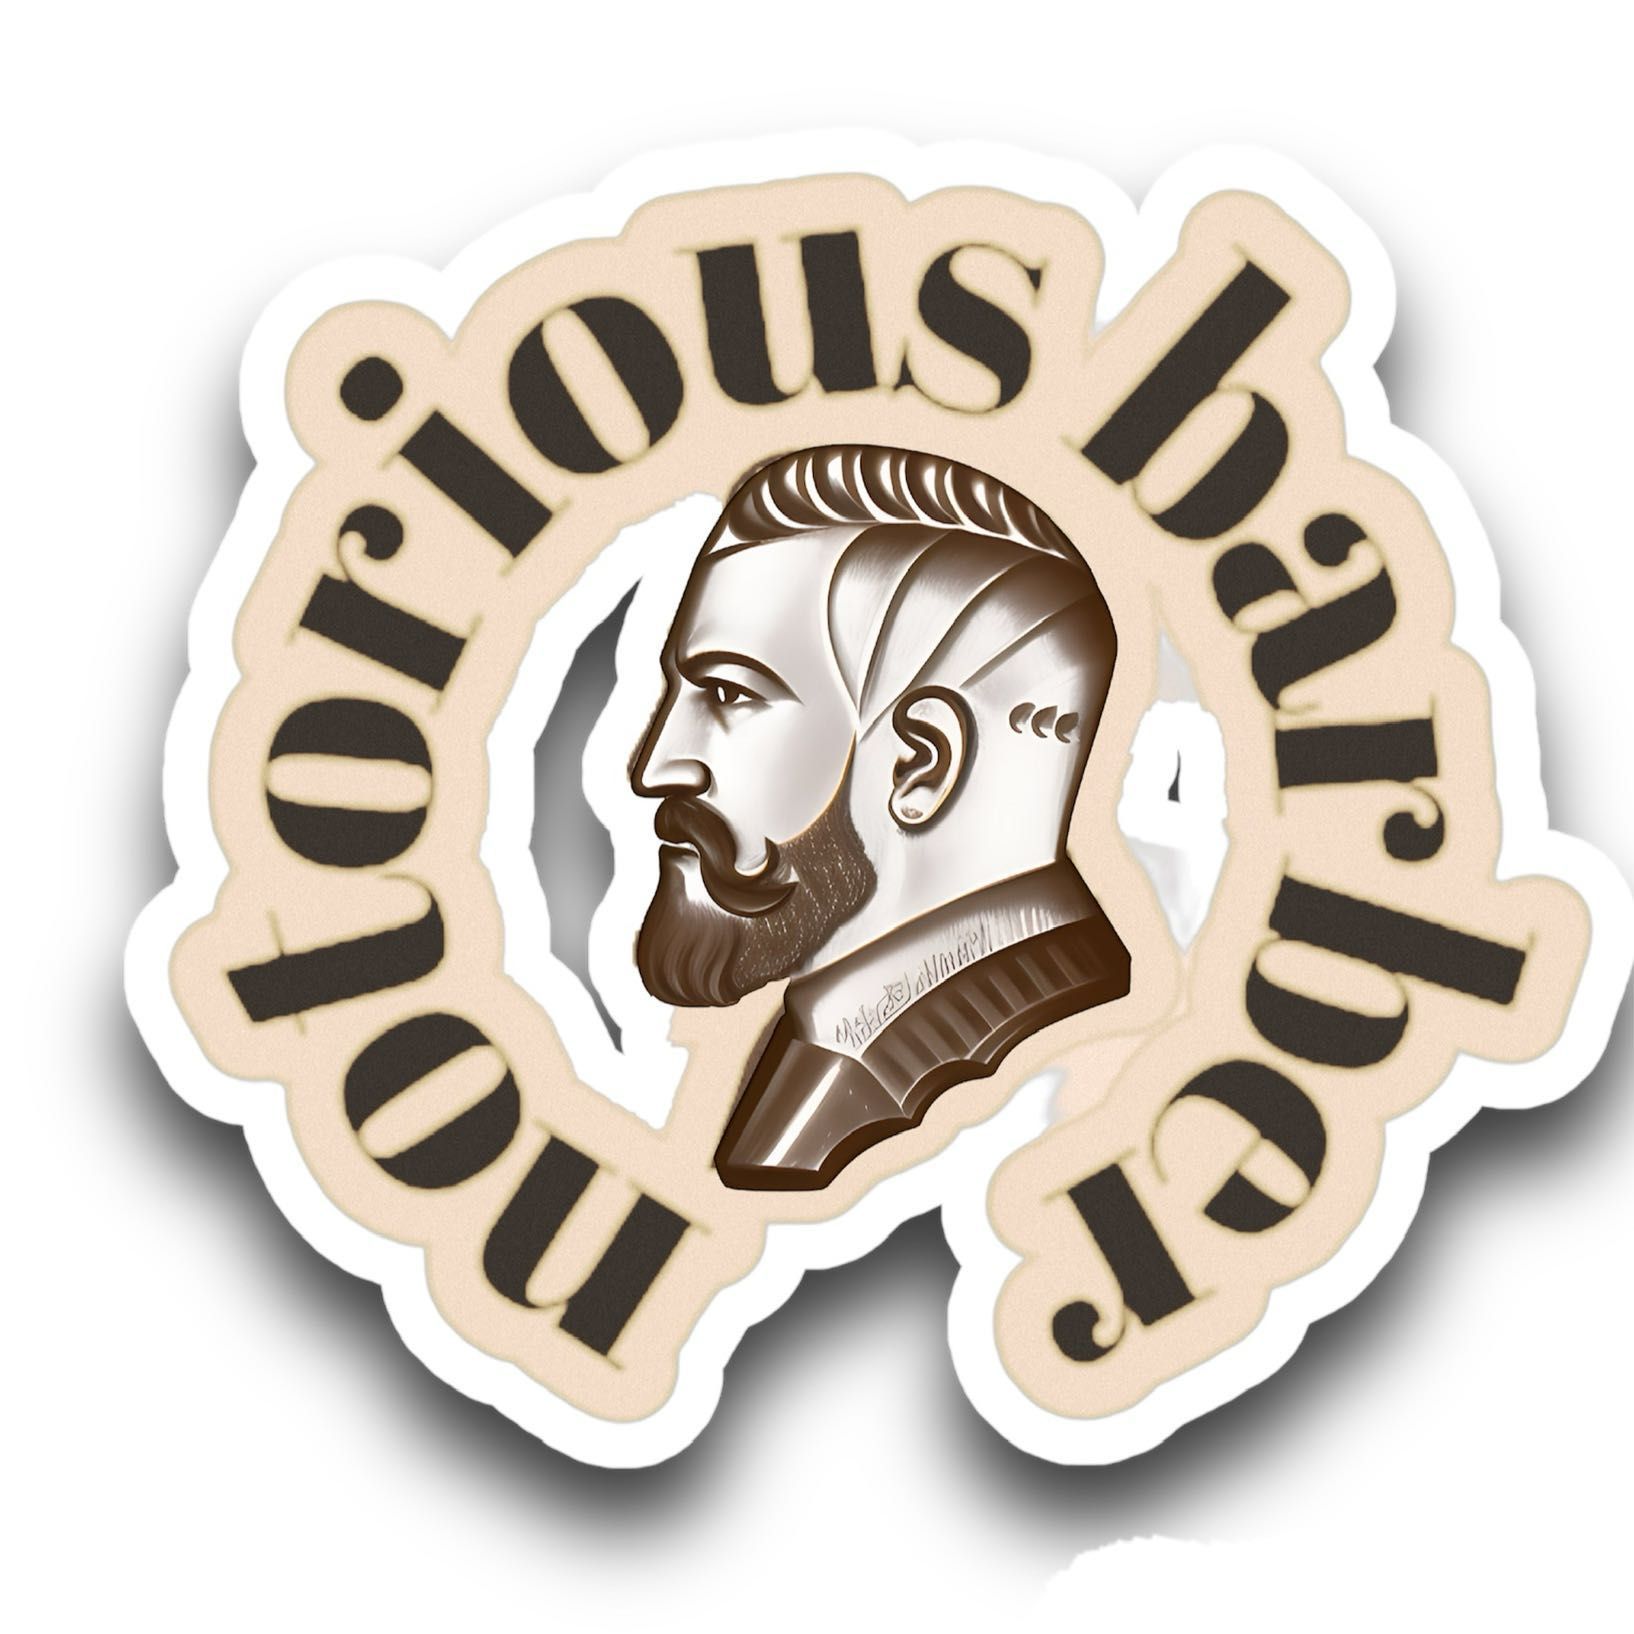 Notorious Ones Barber, 950 Broadway Ave, Suite 436, Tacoma, 98404